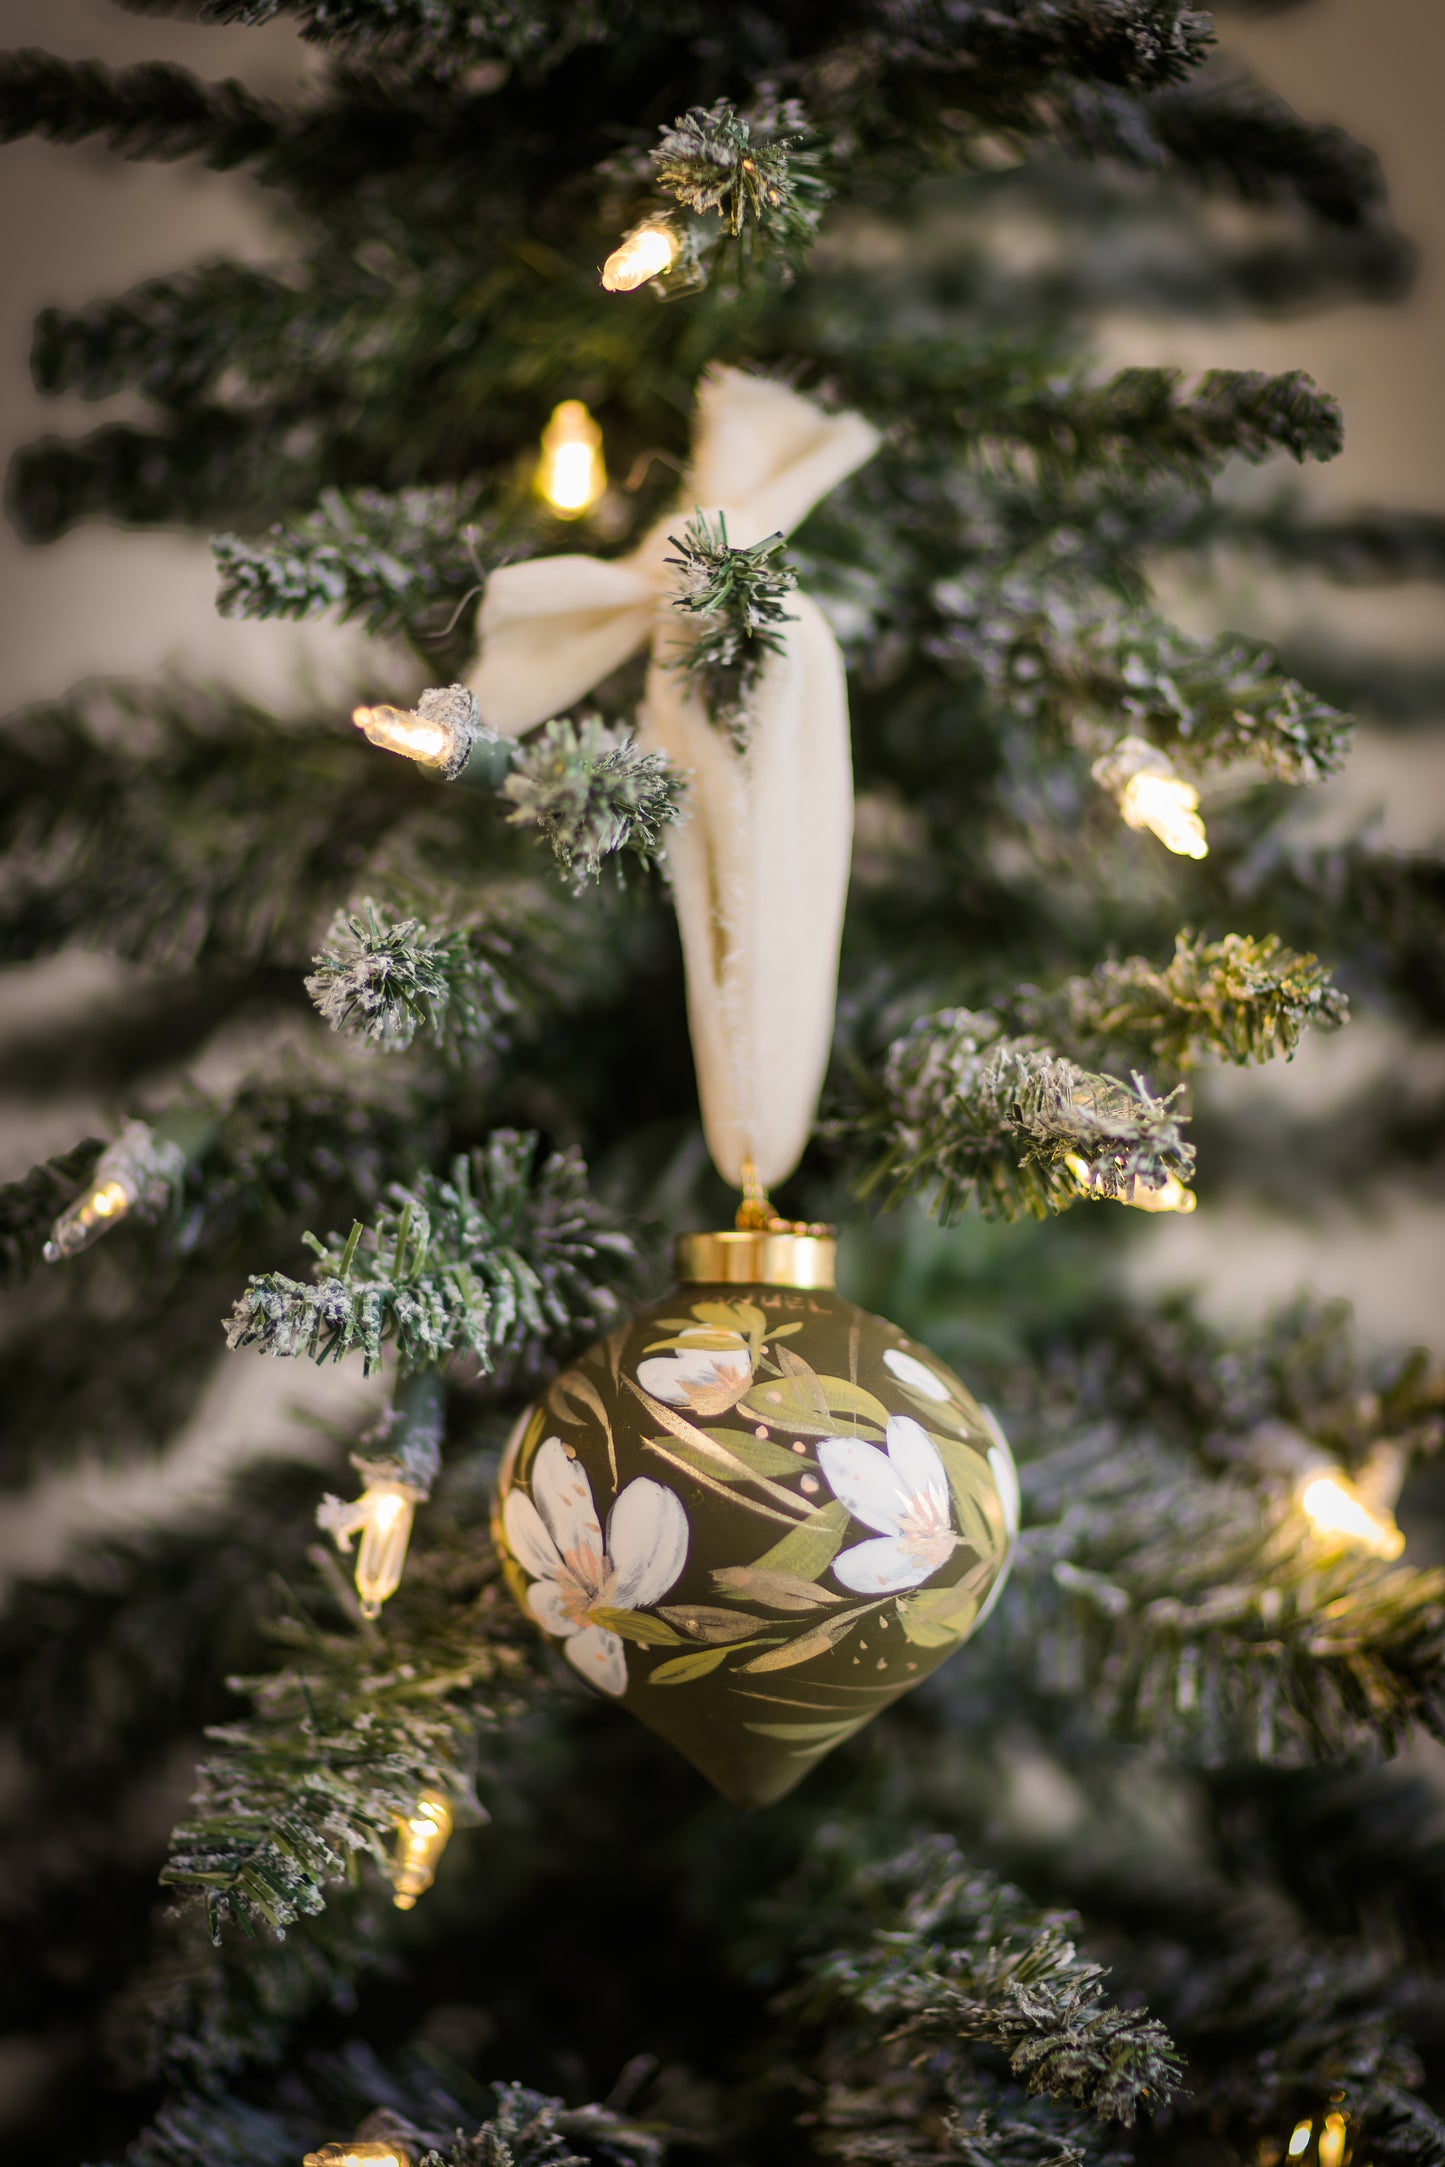 Olive Green, Hand-Painted, Heirloom Ceramic Ornament